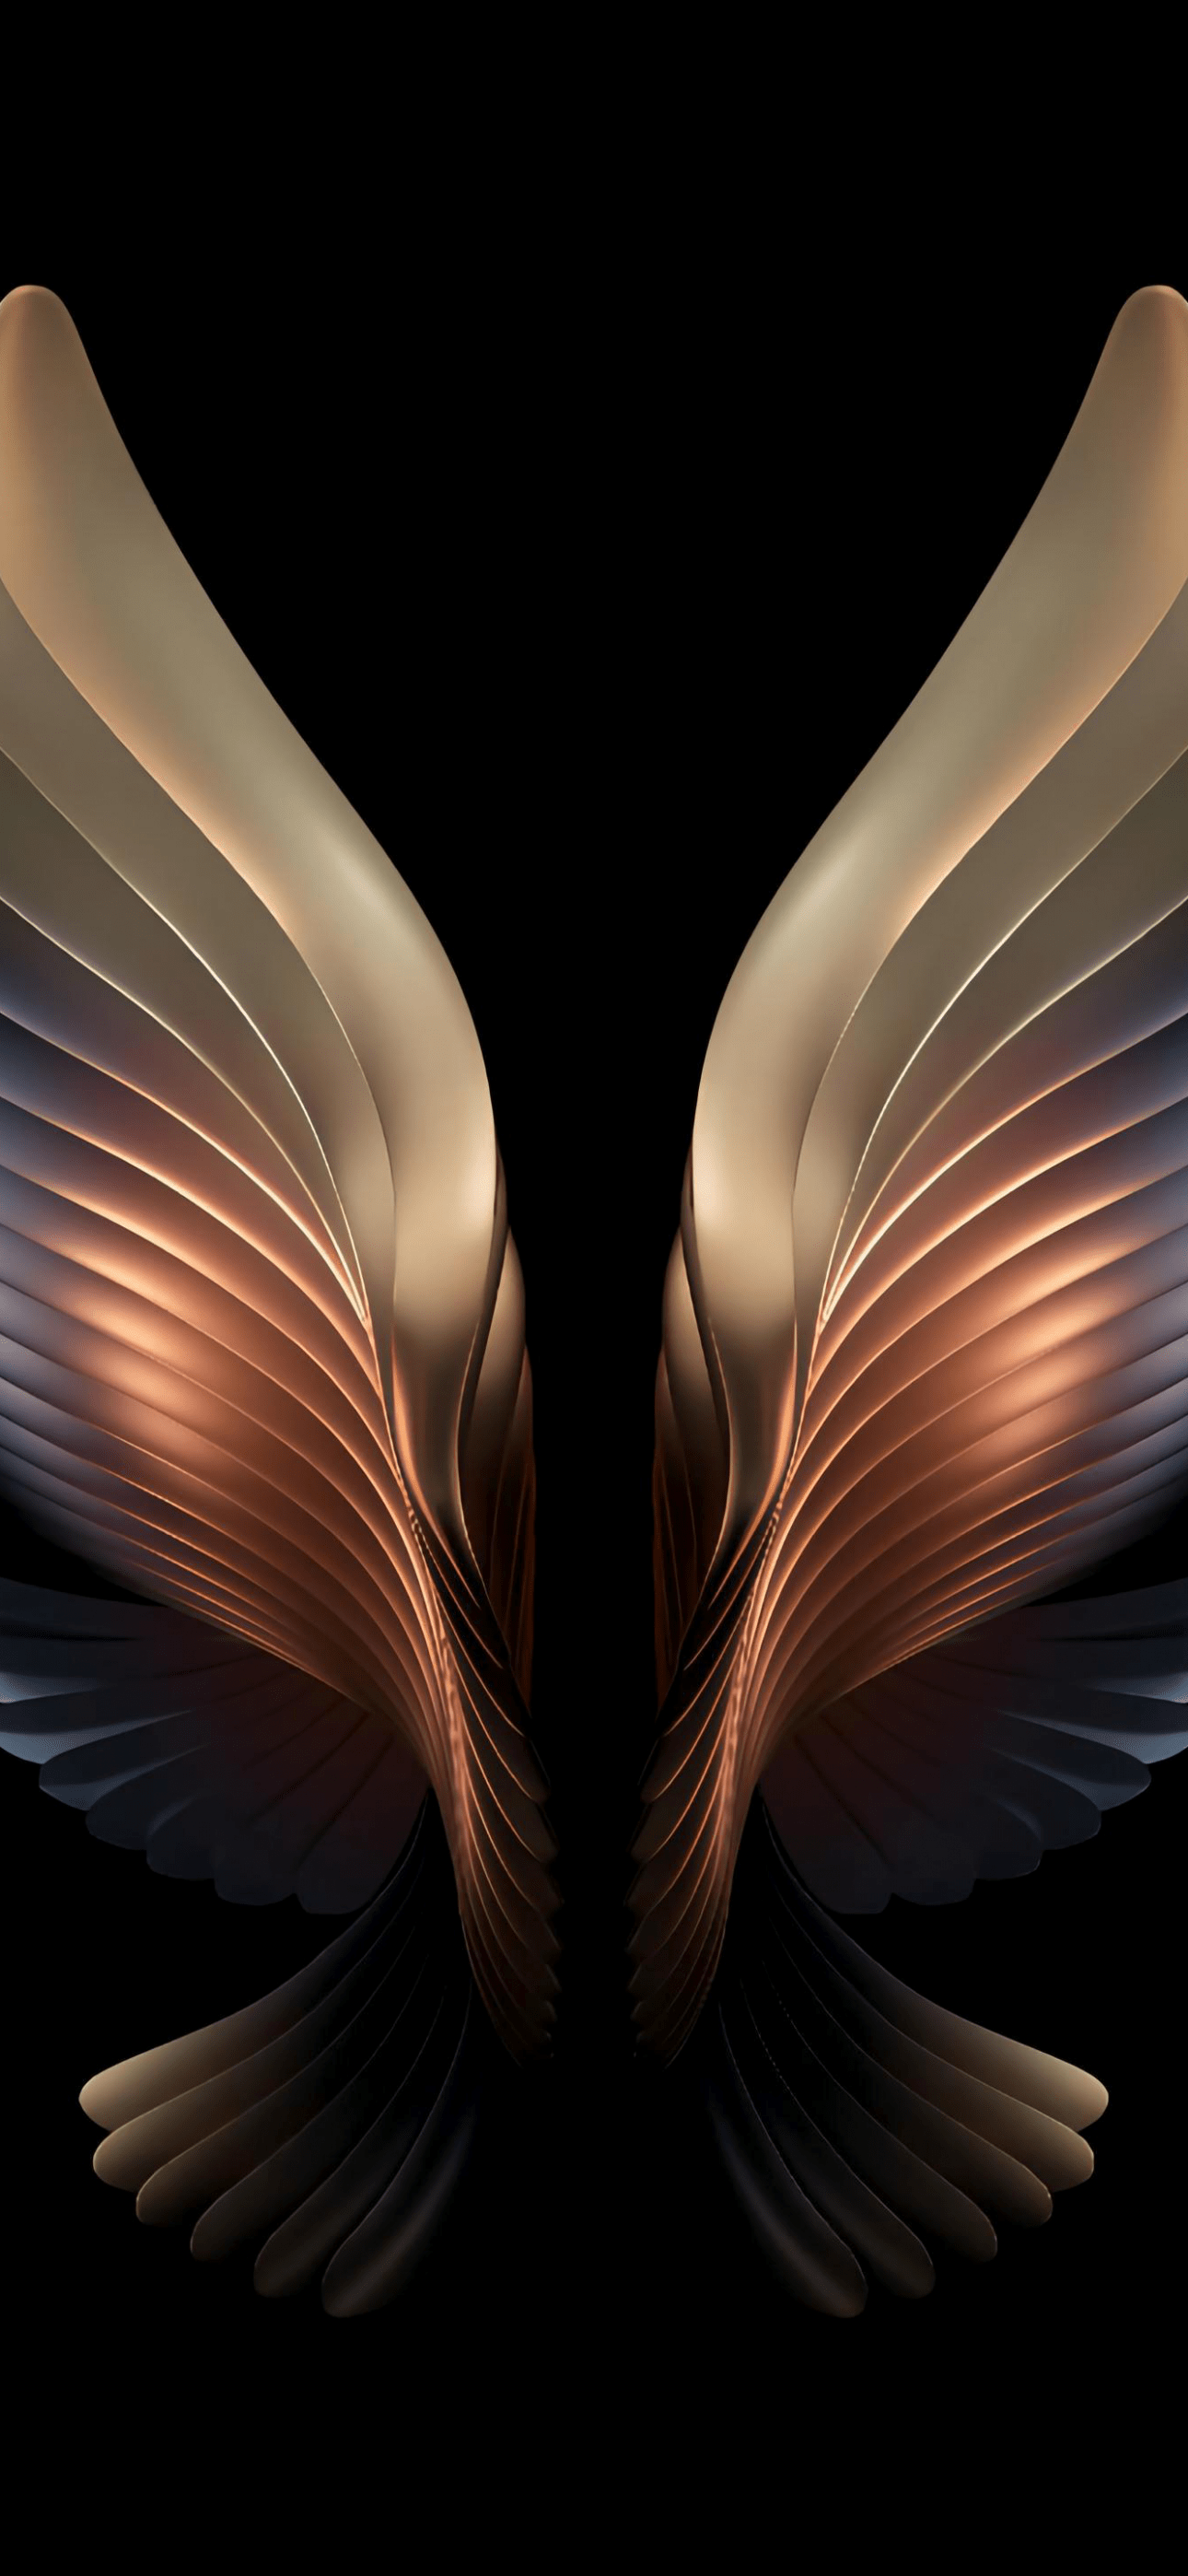 Samsung Galaxy W22 Wallpaper 4K, Wings, Black background, Abstract